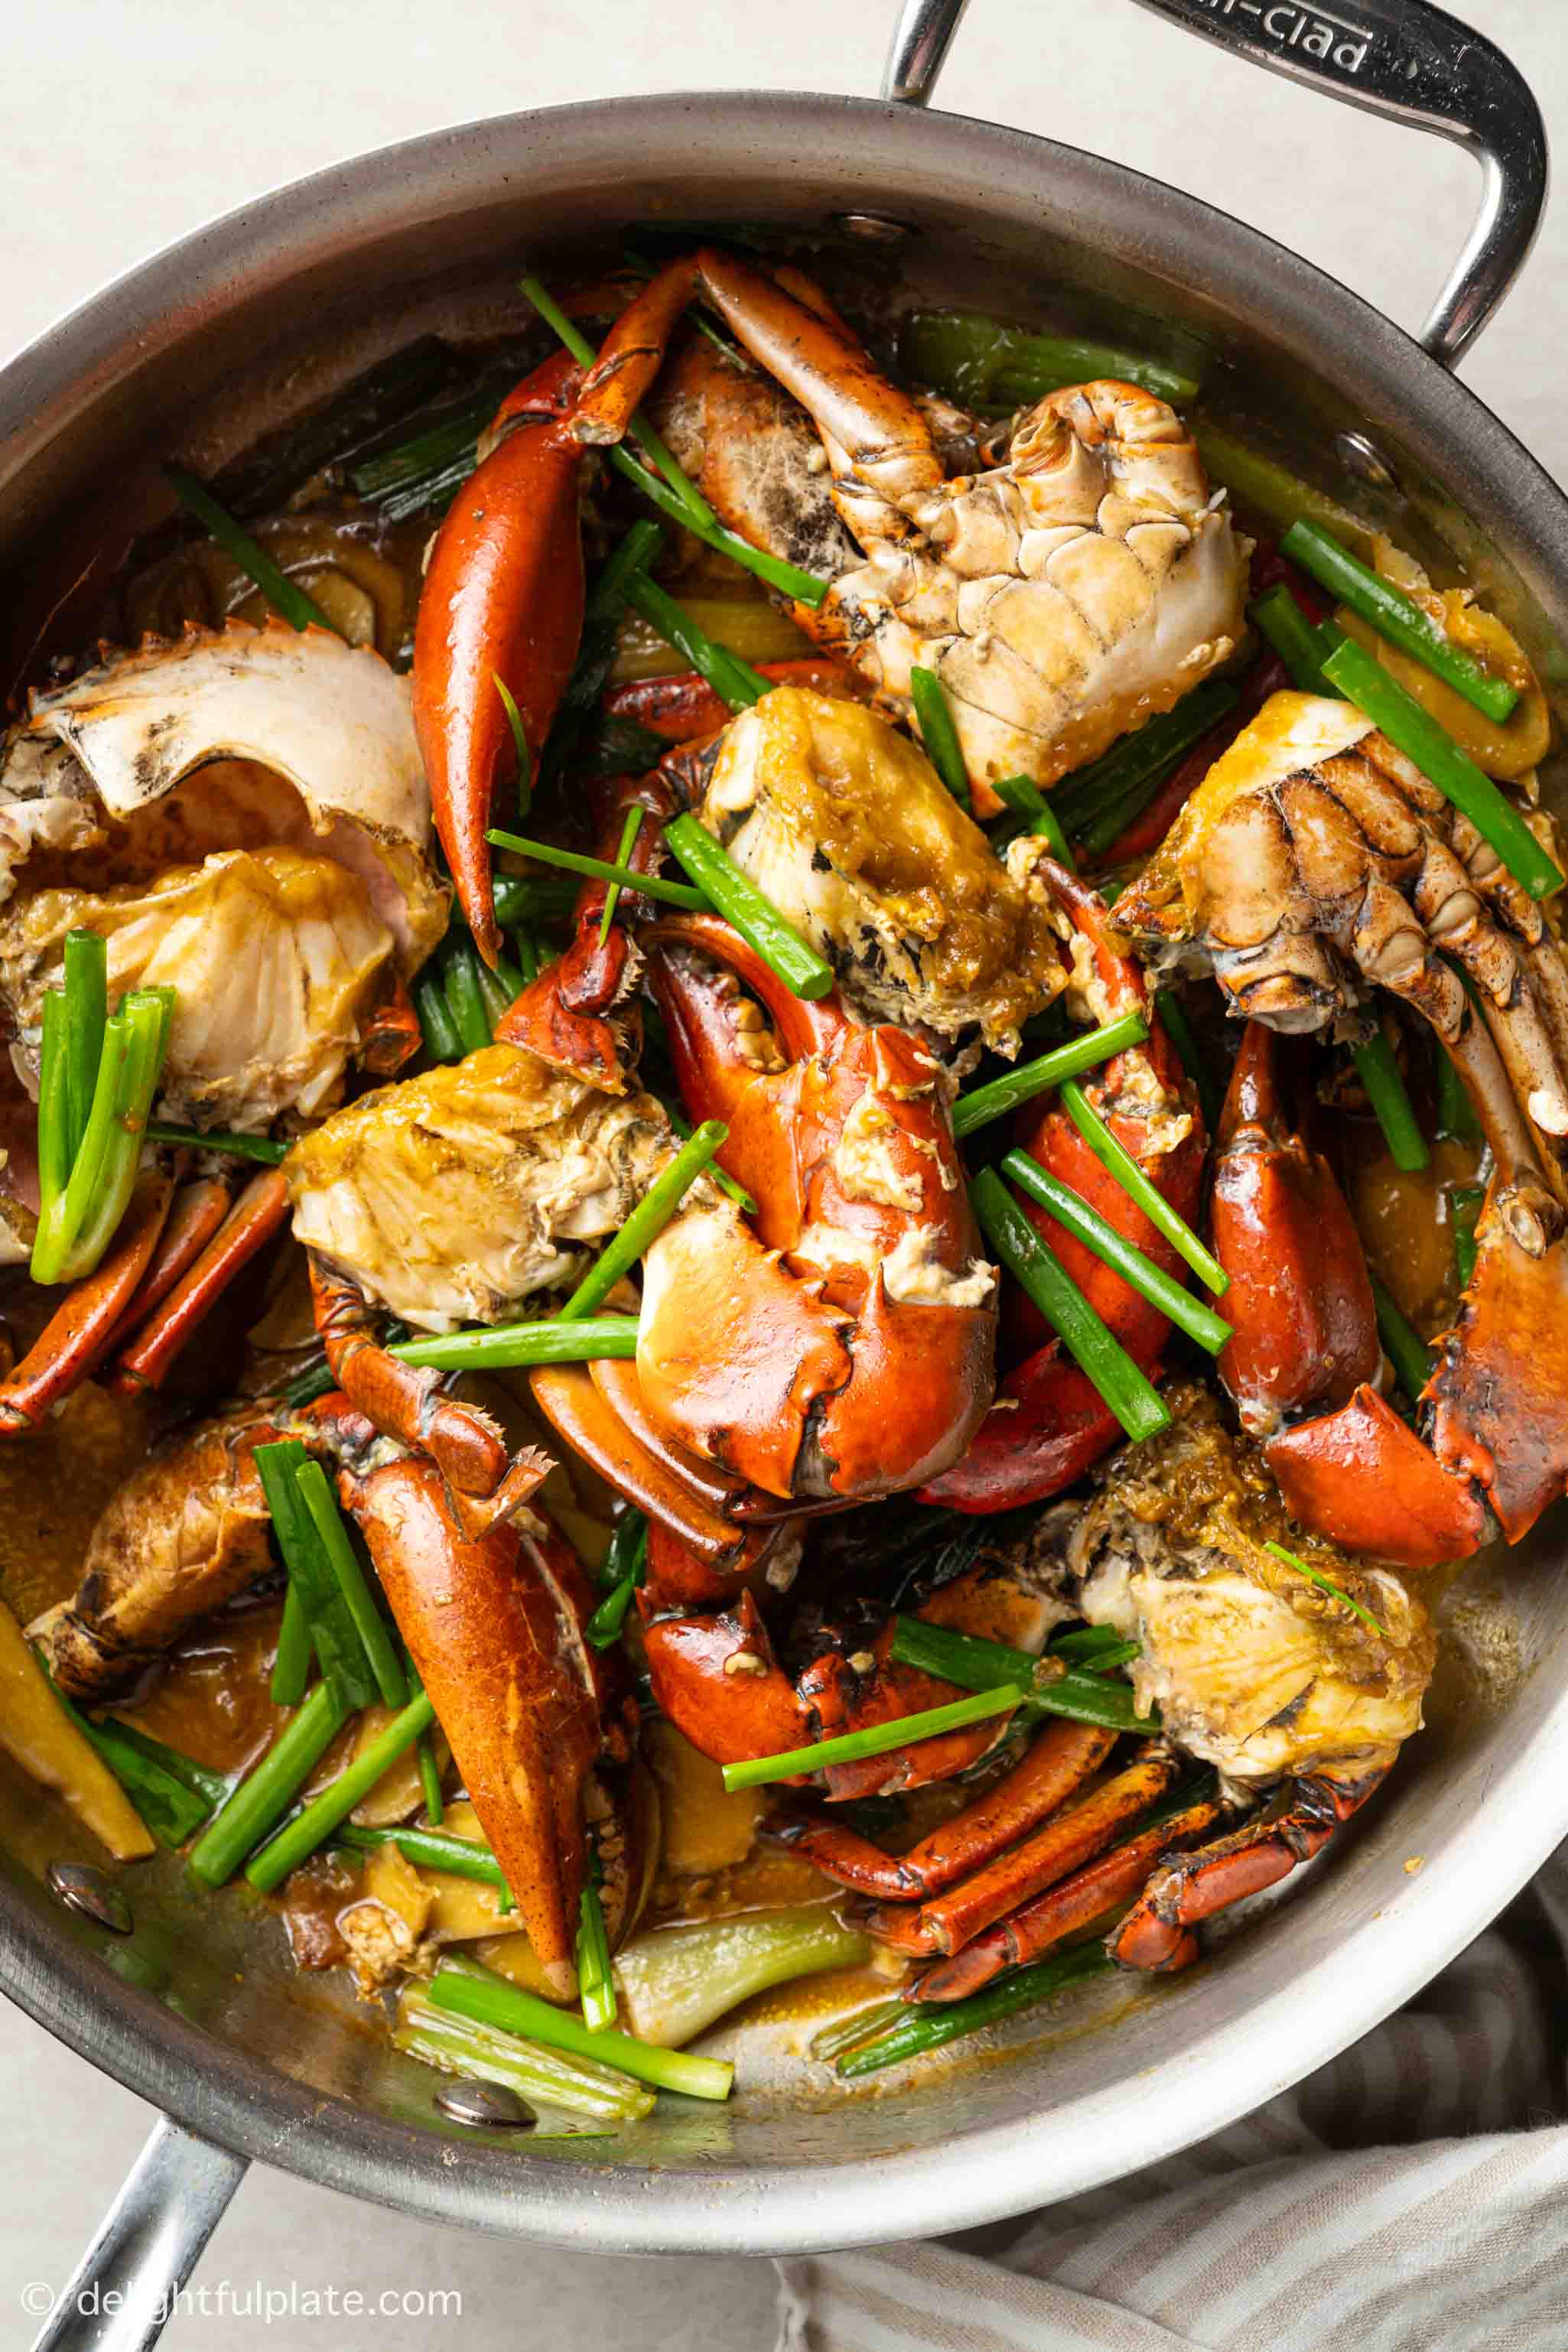 a pan of freshly cooked crab stir-fry with ginger and scallion (cua xao hanh gung).